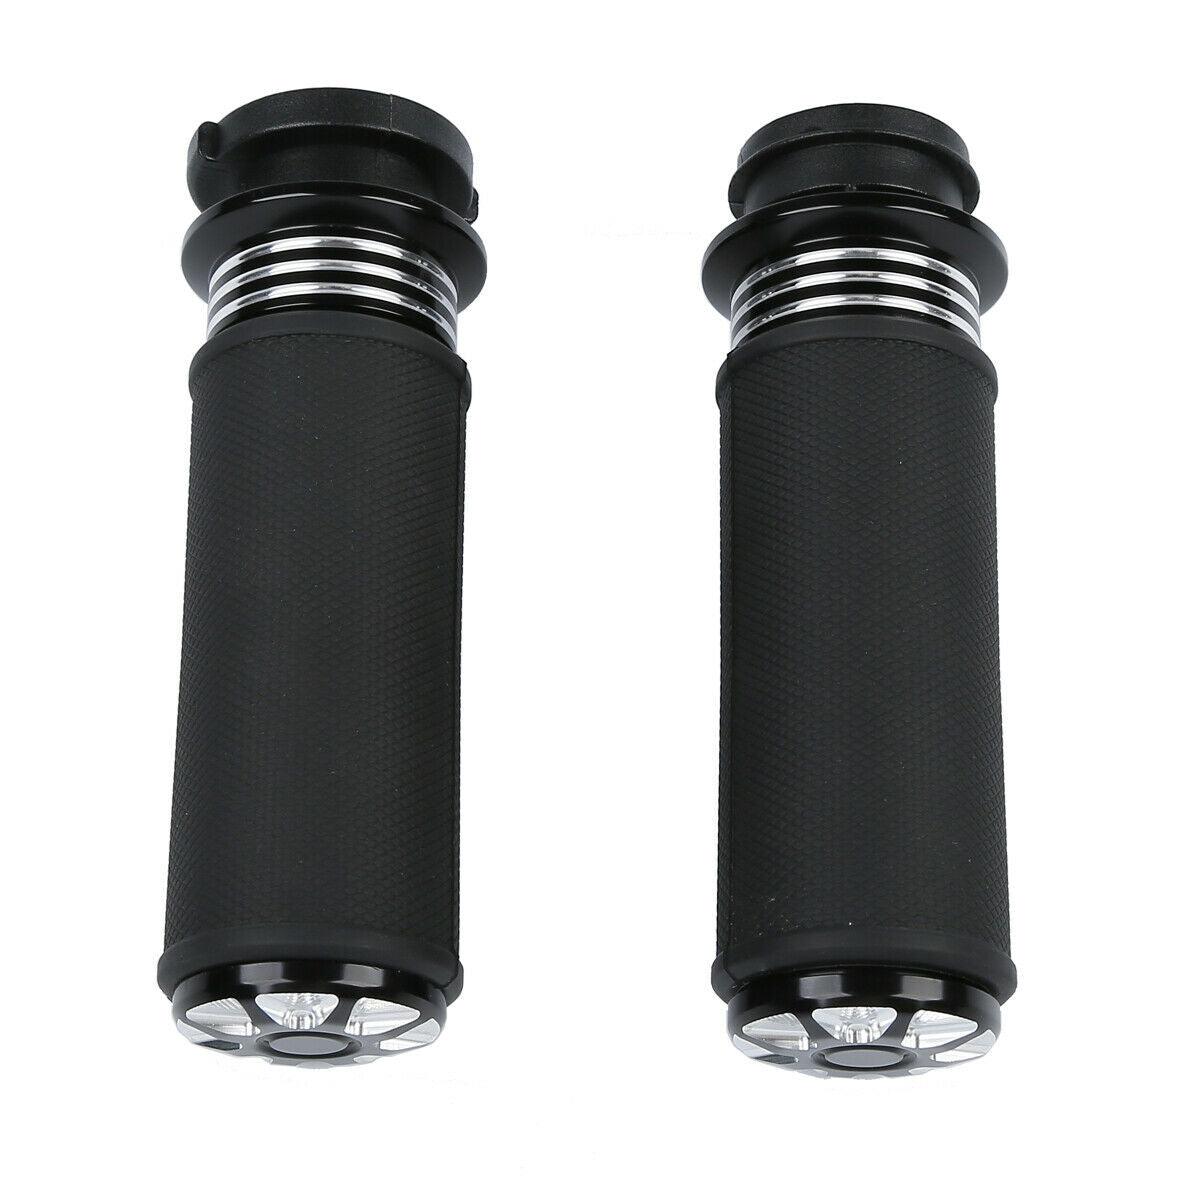 1" 25mm Black Electric Handlebar Bar Grips For Harley Davidson Touring 2008-2020 - Moto Life Products